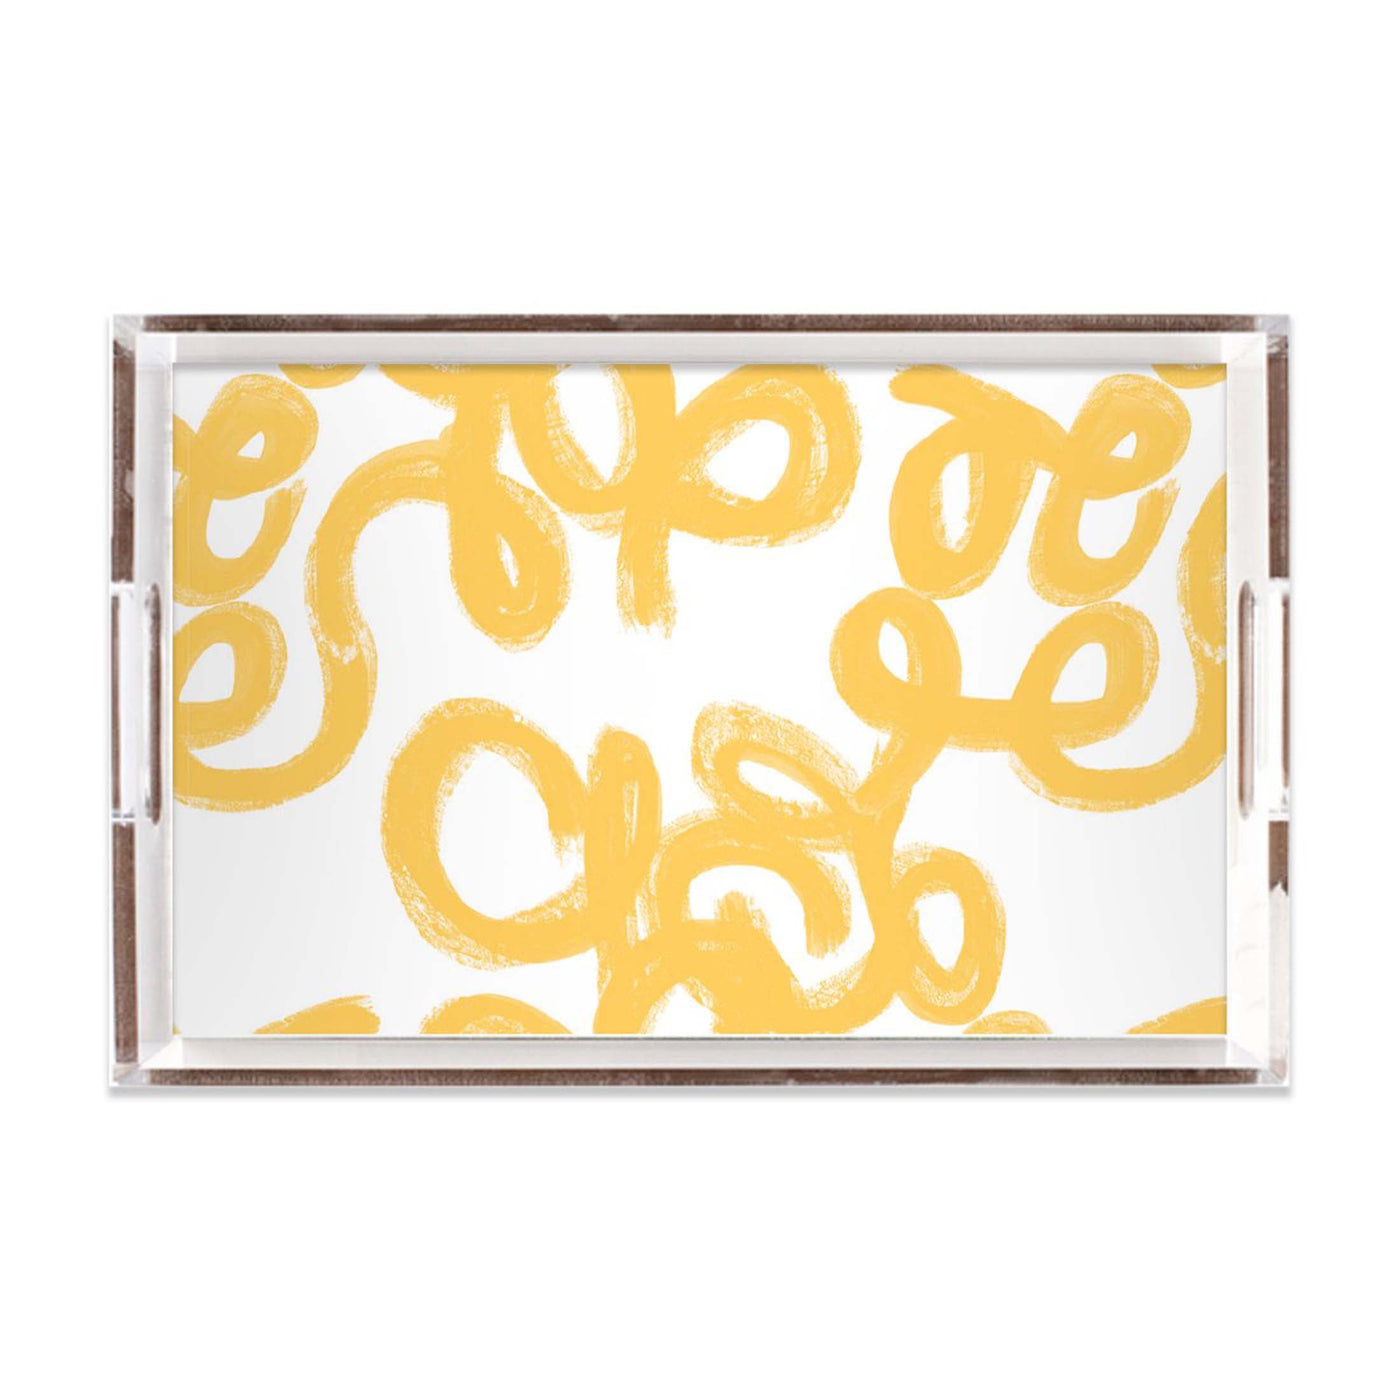 Penelope Lucite Tray Lucite Trays Katie Kime